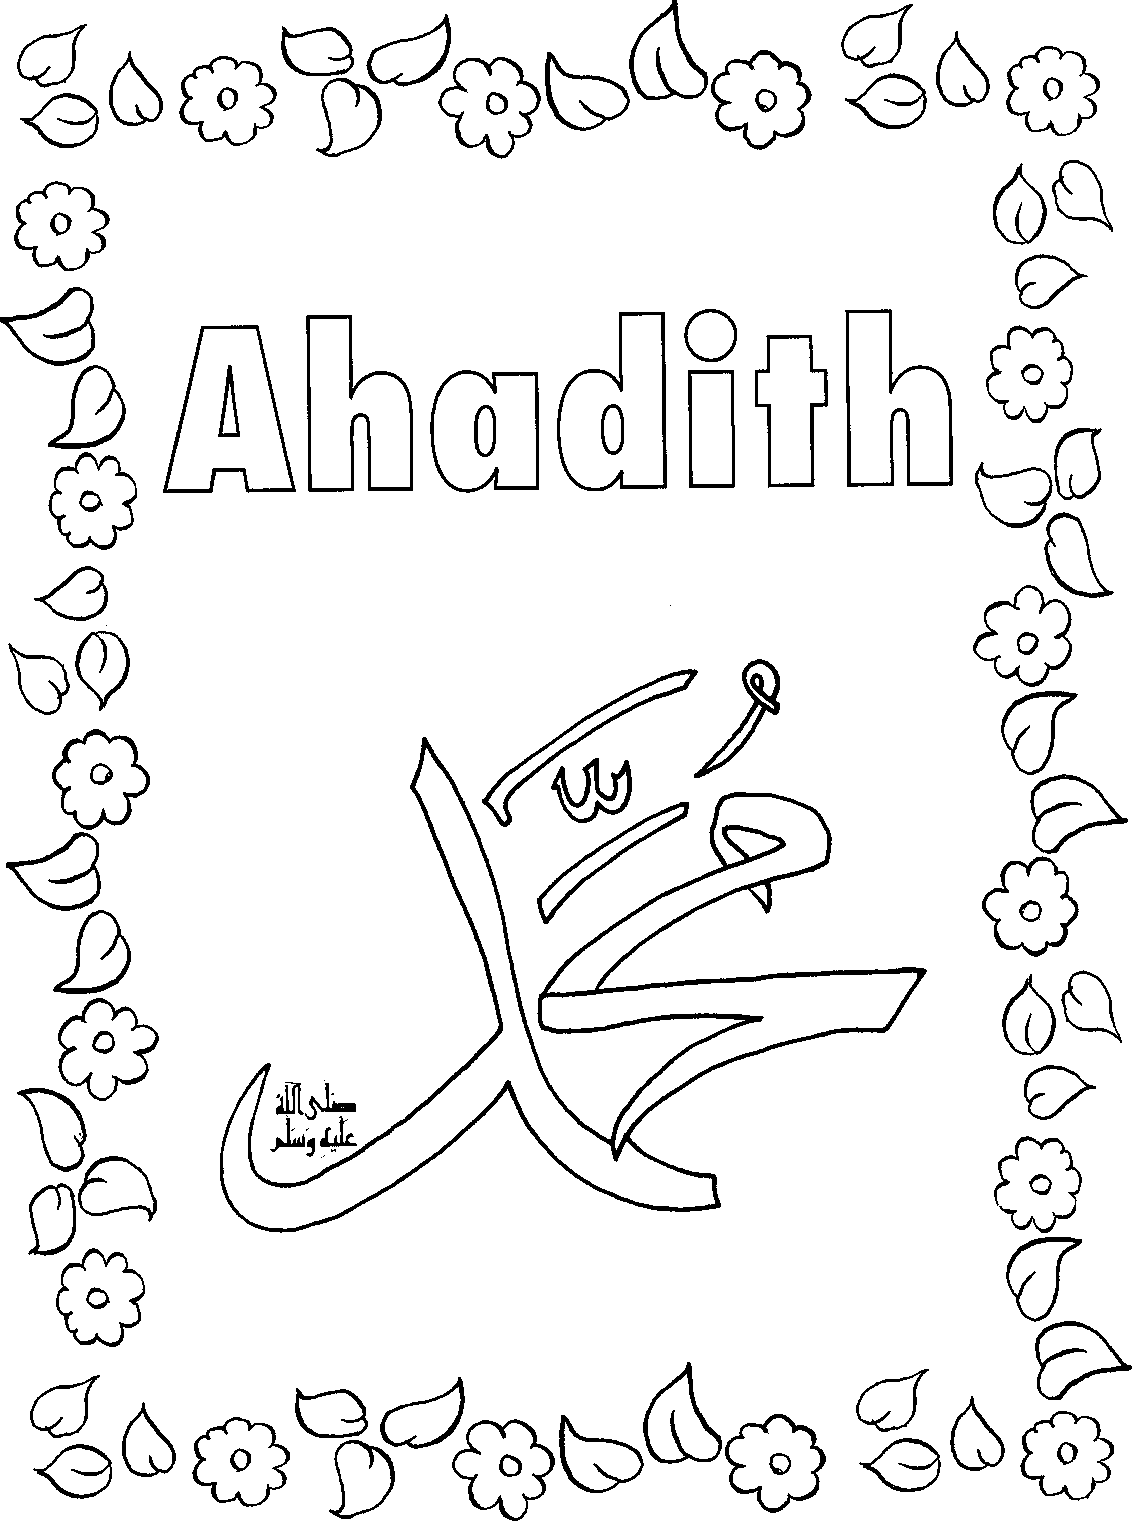 Quran drawing at getdrawings. Wheat clipart colouring page